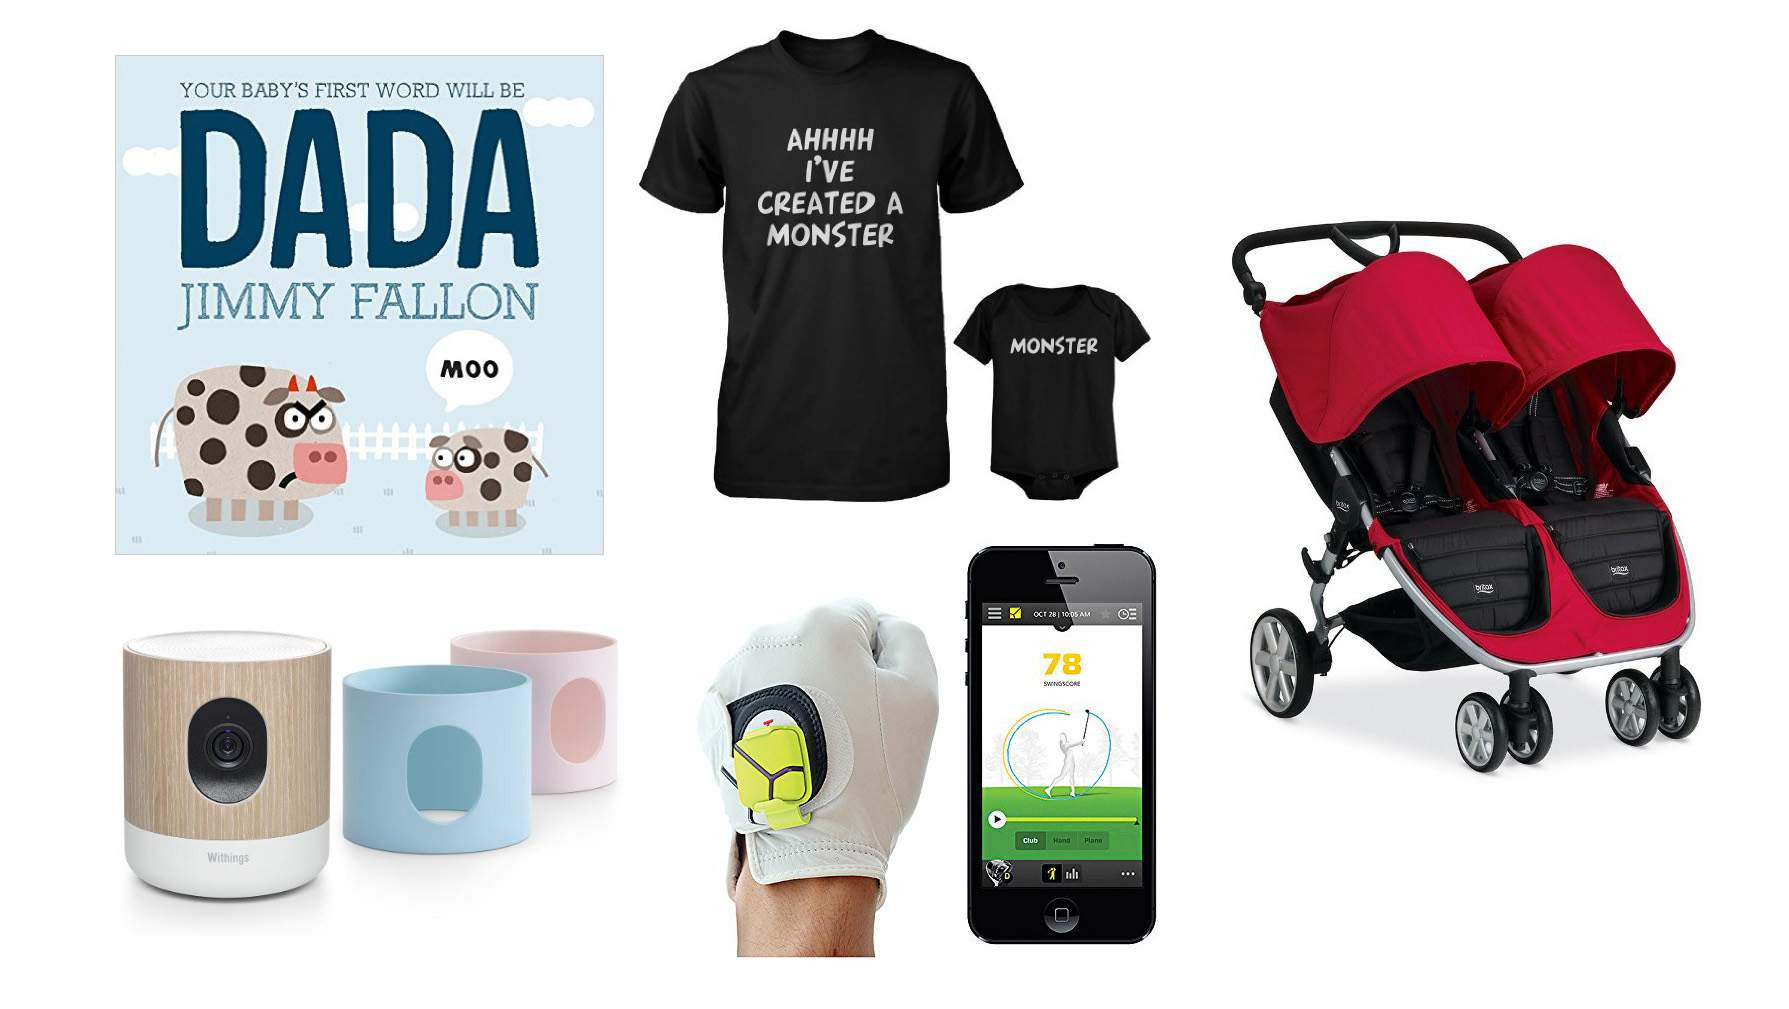 Father Day Gift Ideas For New Dads
 Top 10 Best Father’s Day Gifts for New Dads